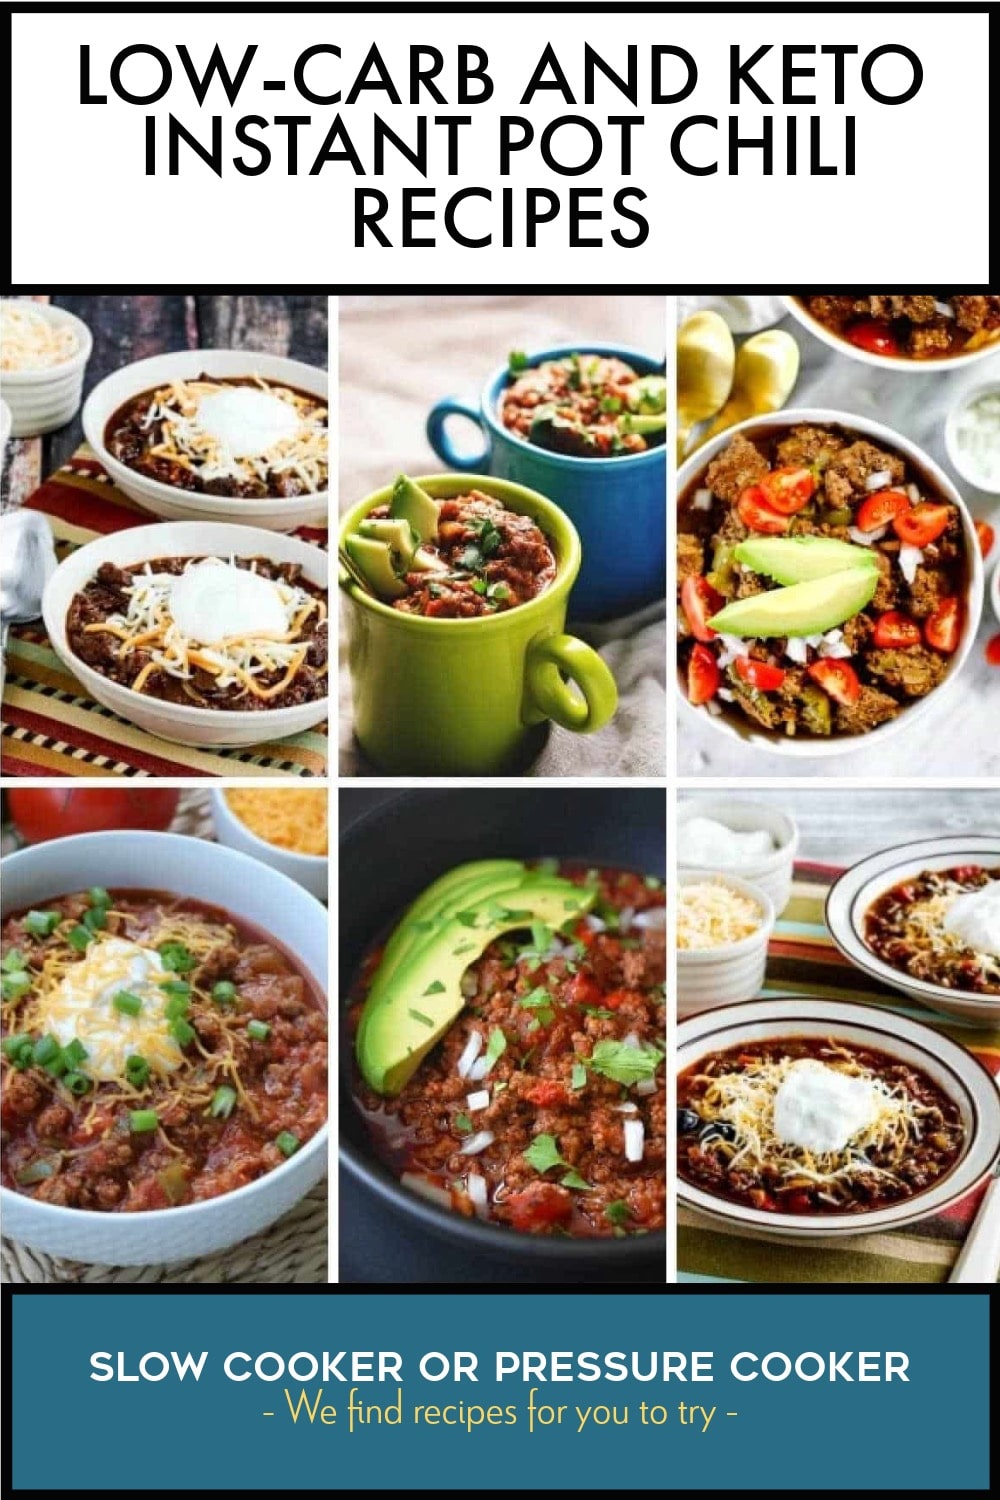 Pinterest image of Low-Carb and Keto Instant Pot Chili Recipes